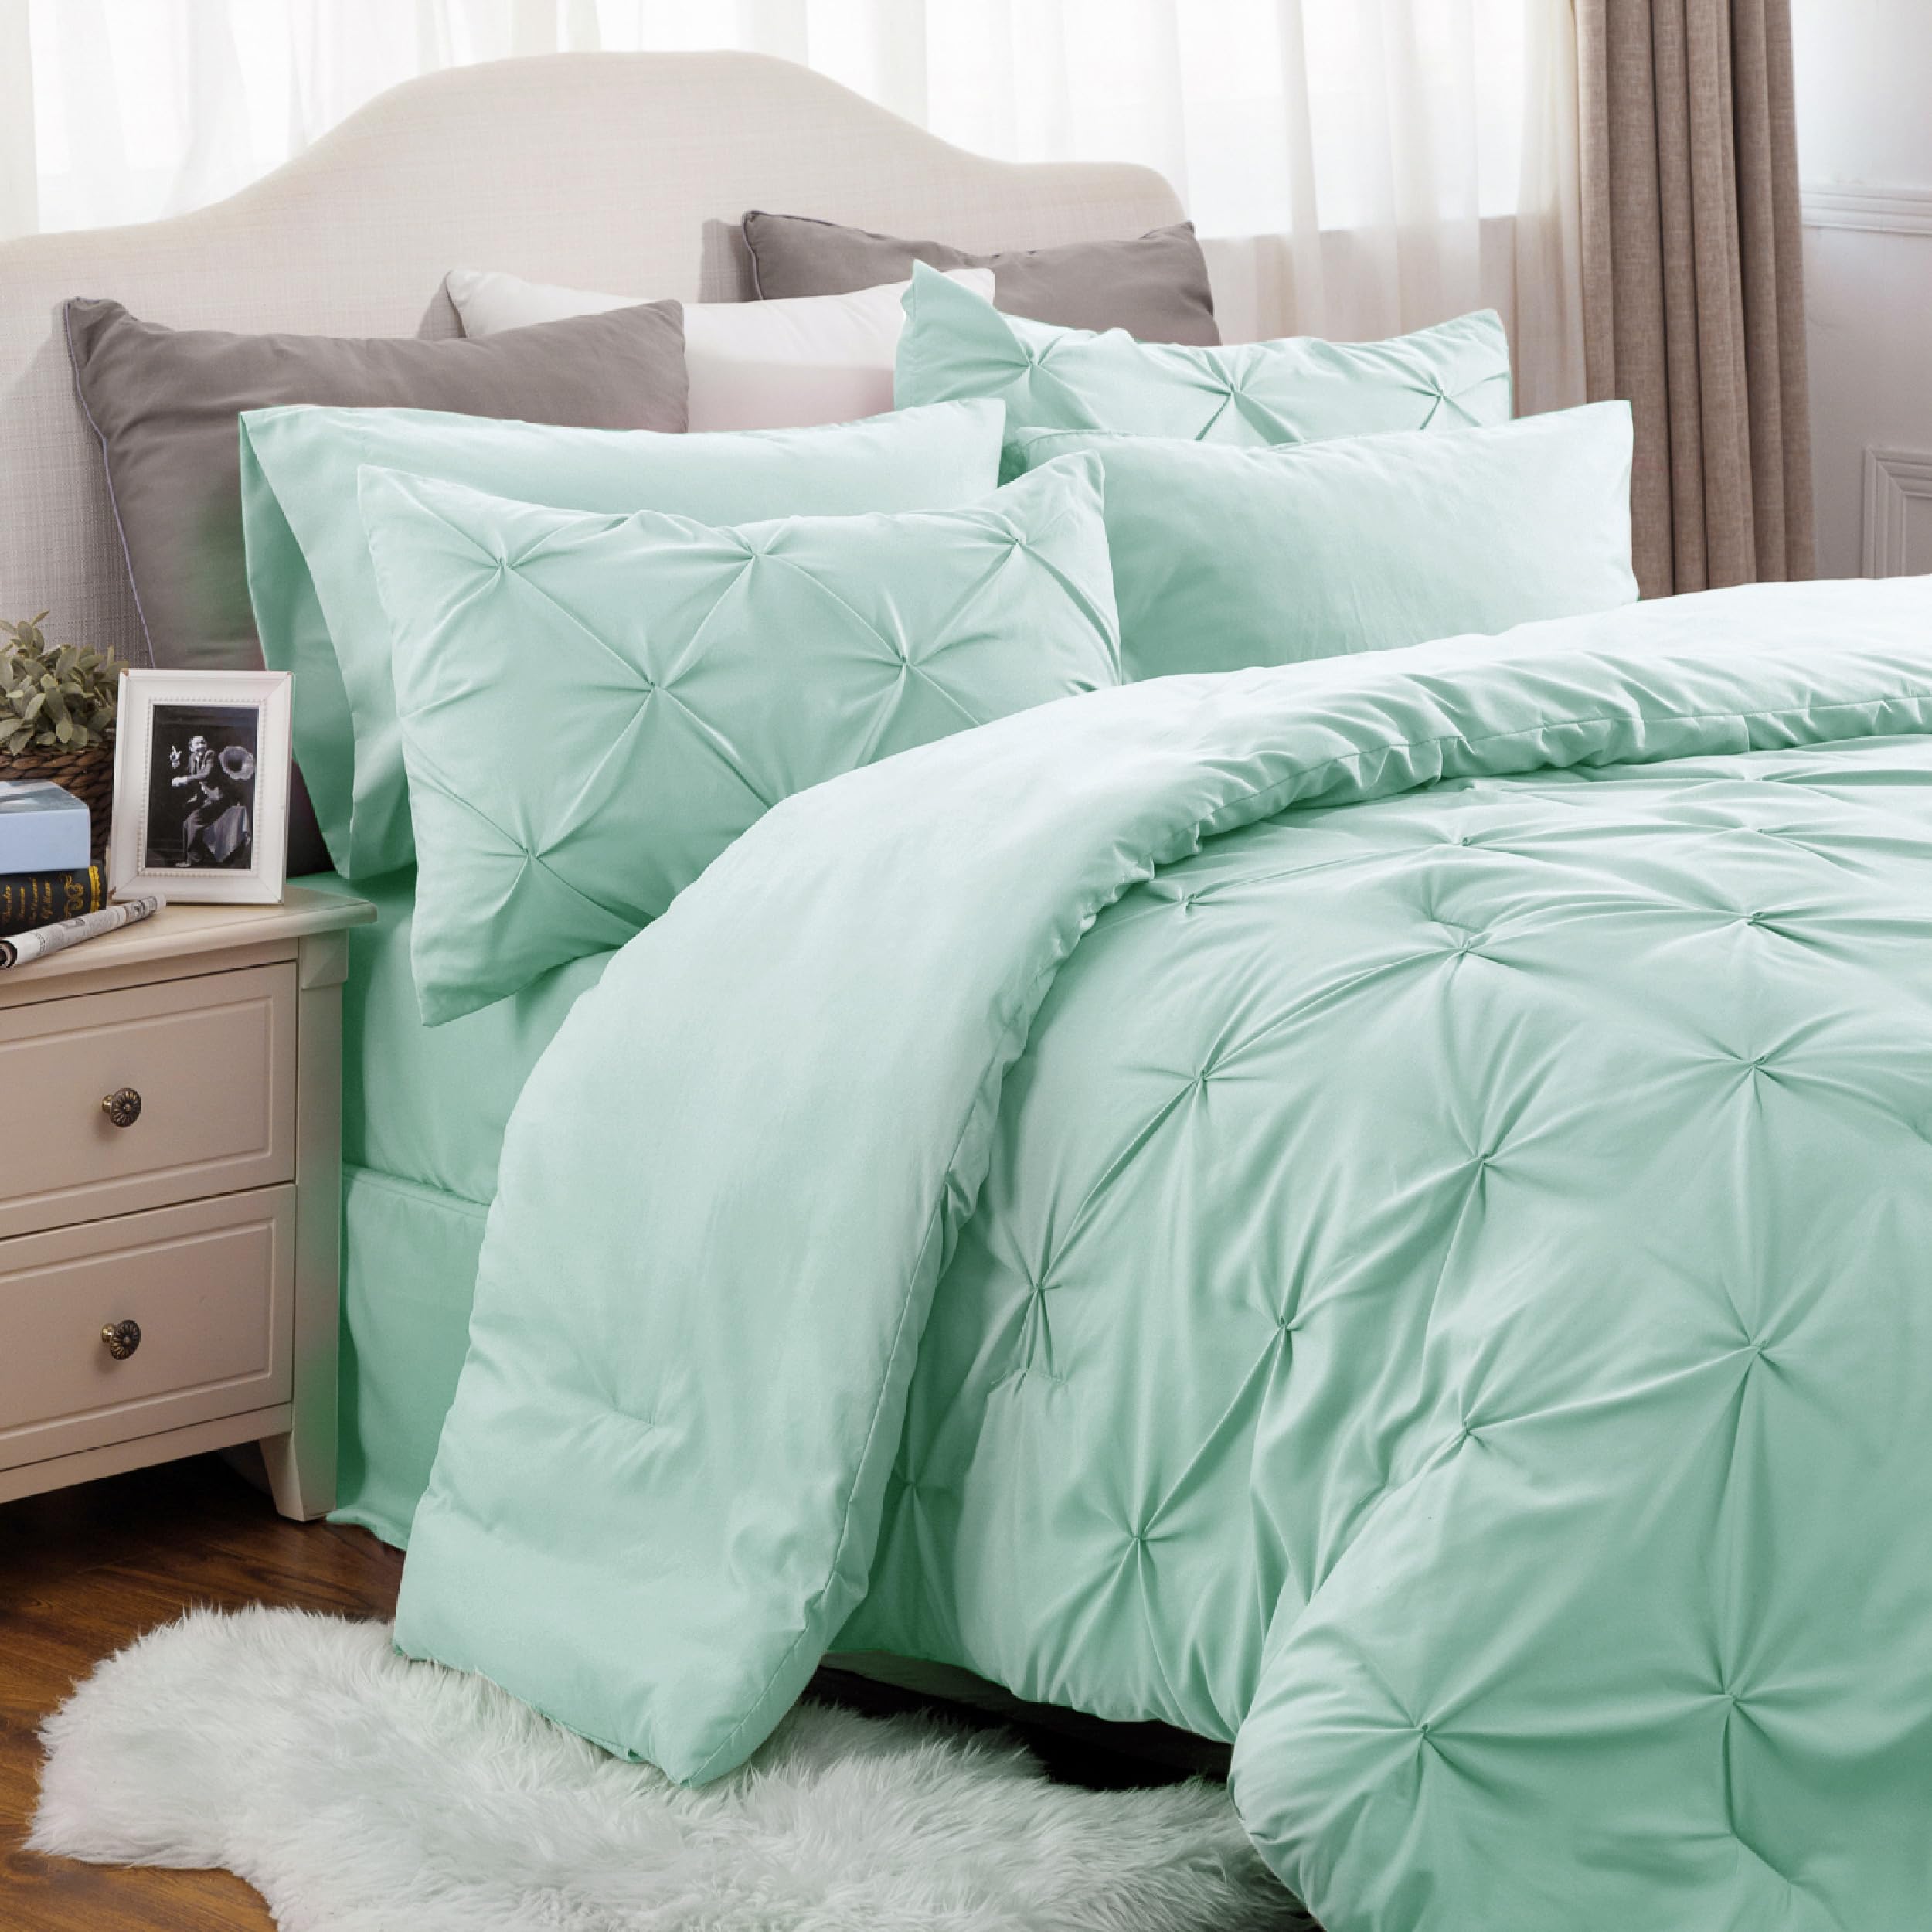 Bedsure Twin Size Comforter Set - Bed in a Bag Queen 5 Pieces, Pintuck  Beddding Sets Sage Green Bed Set with Comforter, Sheets, Pillowcase & Sham